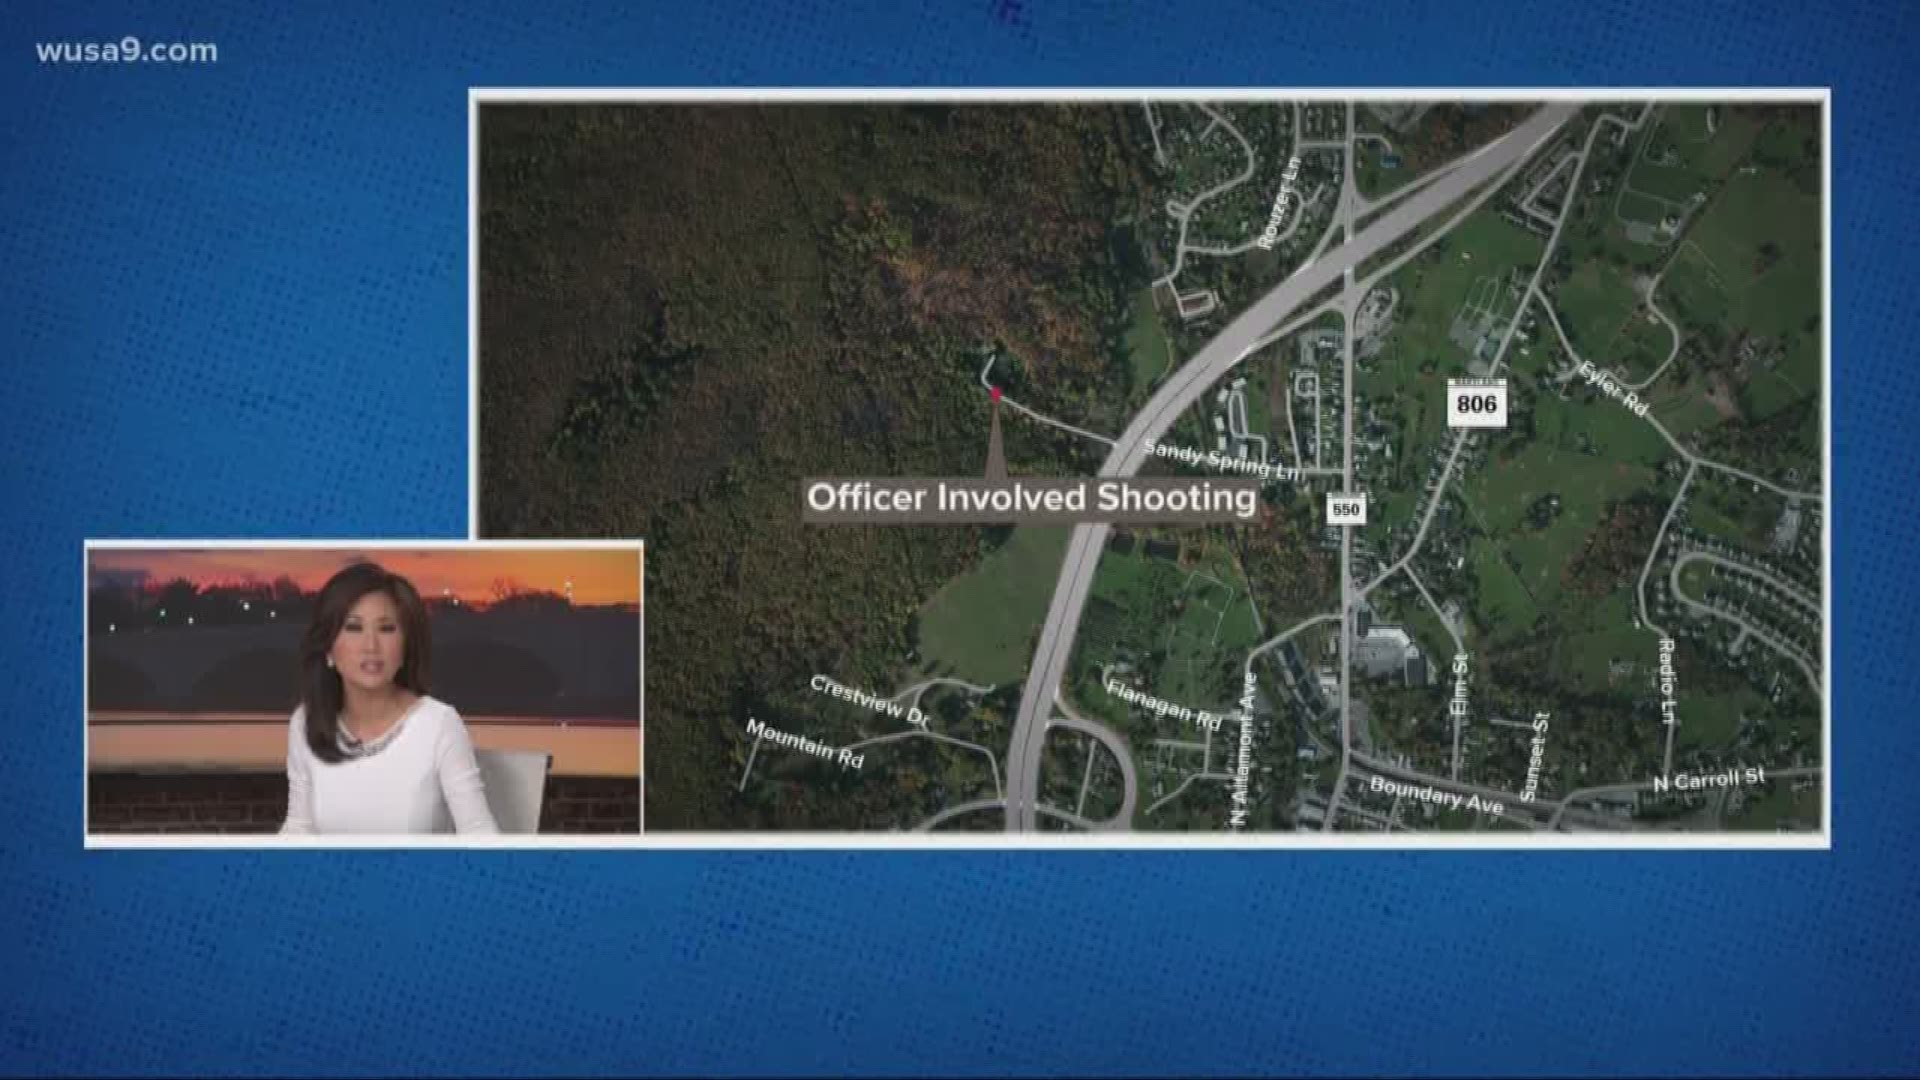 An officer-involved shooting was reported in Frederick County, Md. on Monday morning, according to the Frederick County Sheriff’s Office.